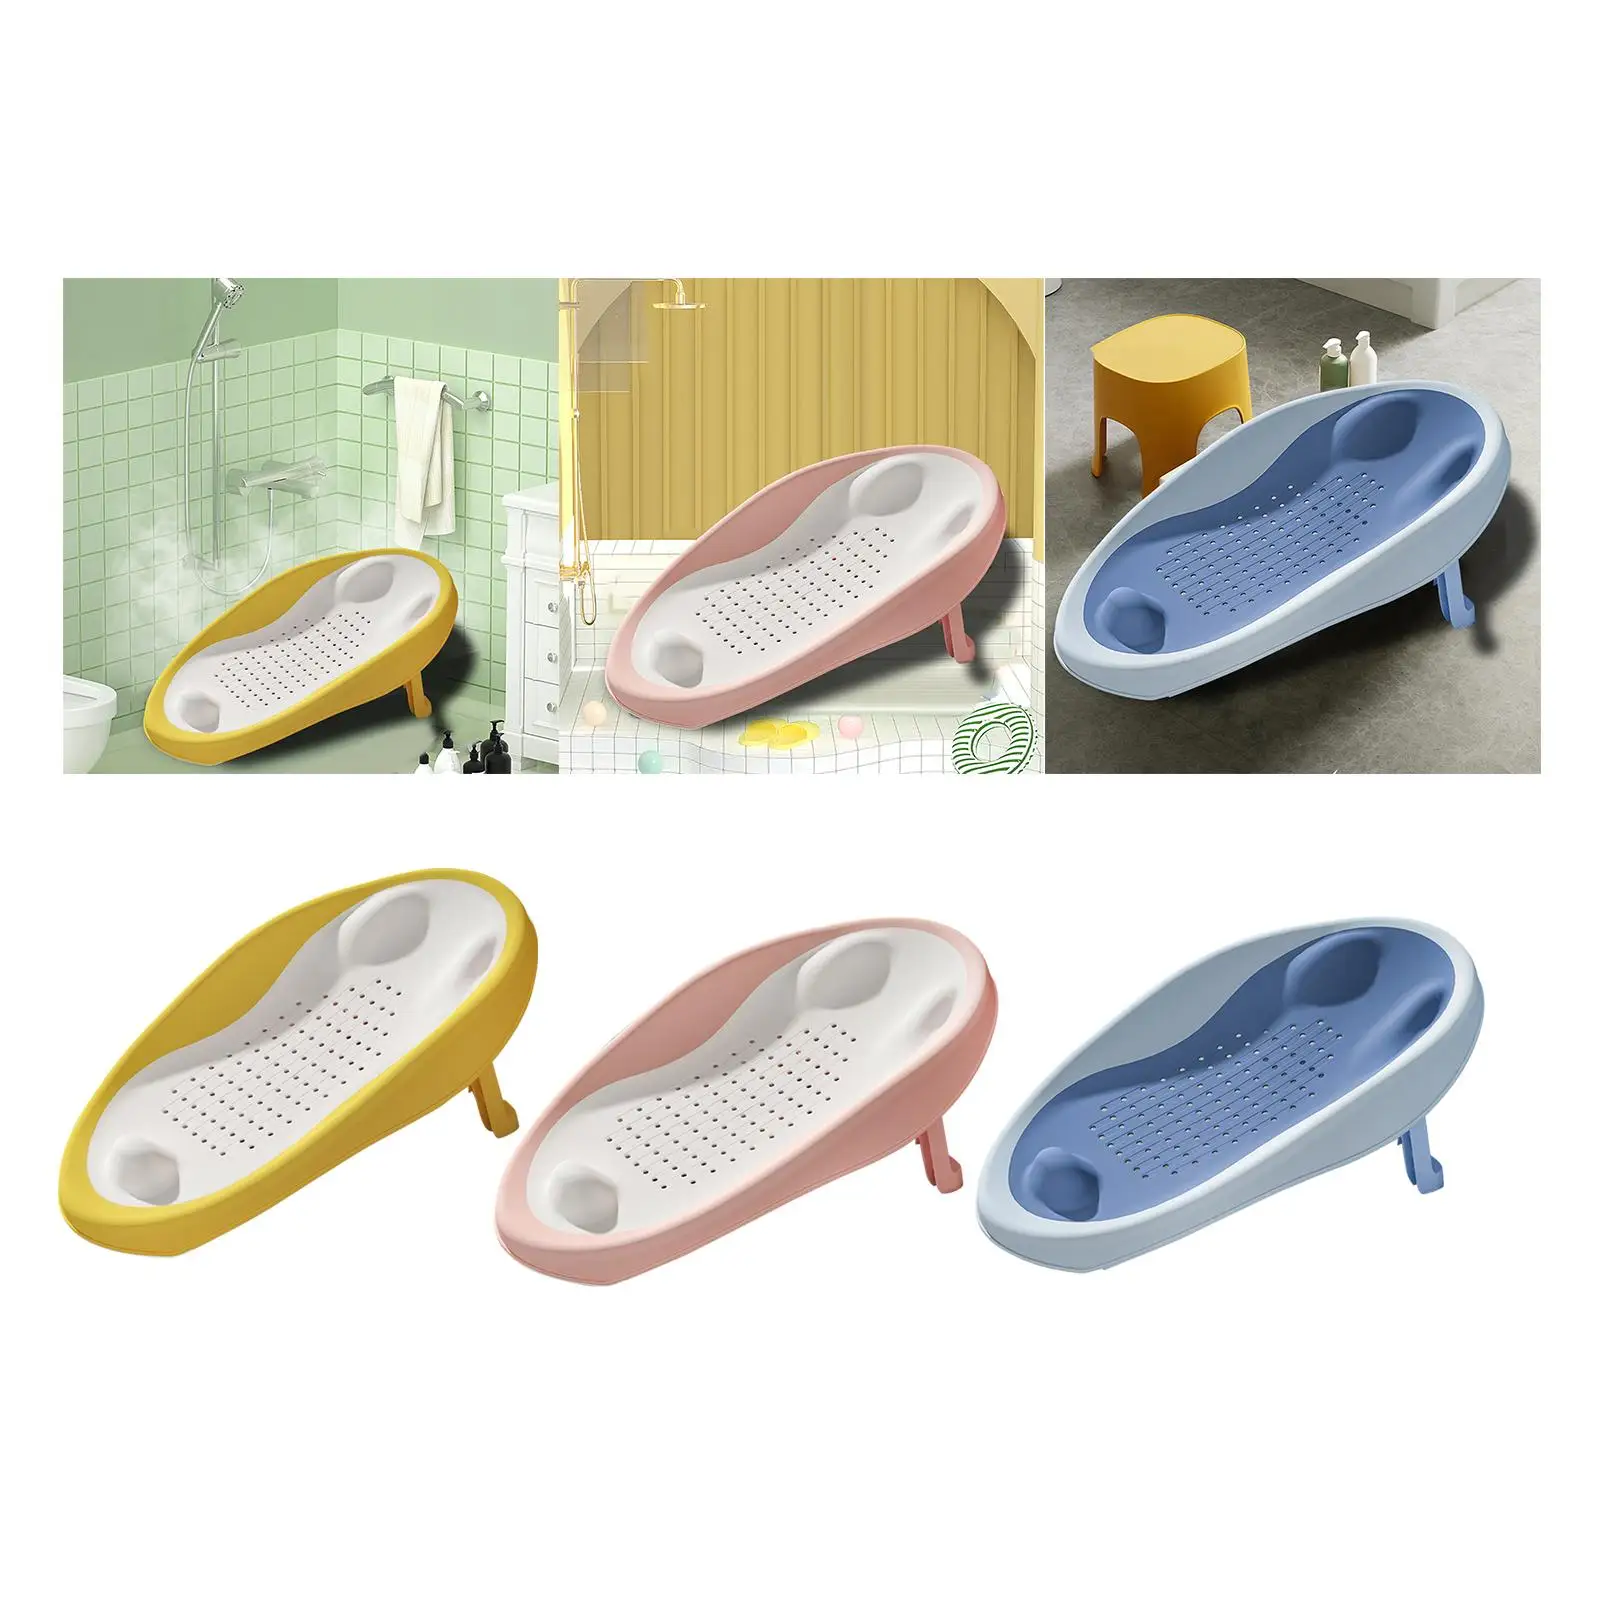 Baby Bath Support Multi Function Anti Slip Accessories Breathable Folding Bath Rack Bathing Seat Shower Support for Toddlers